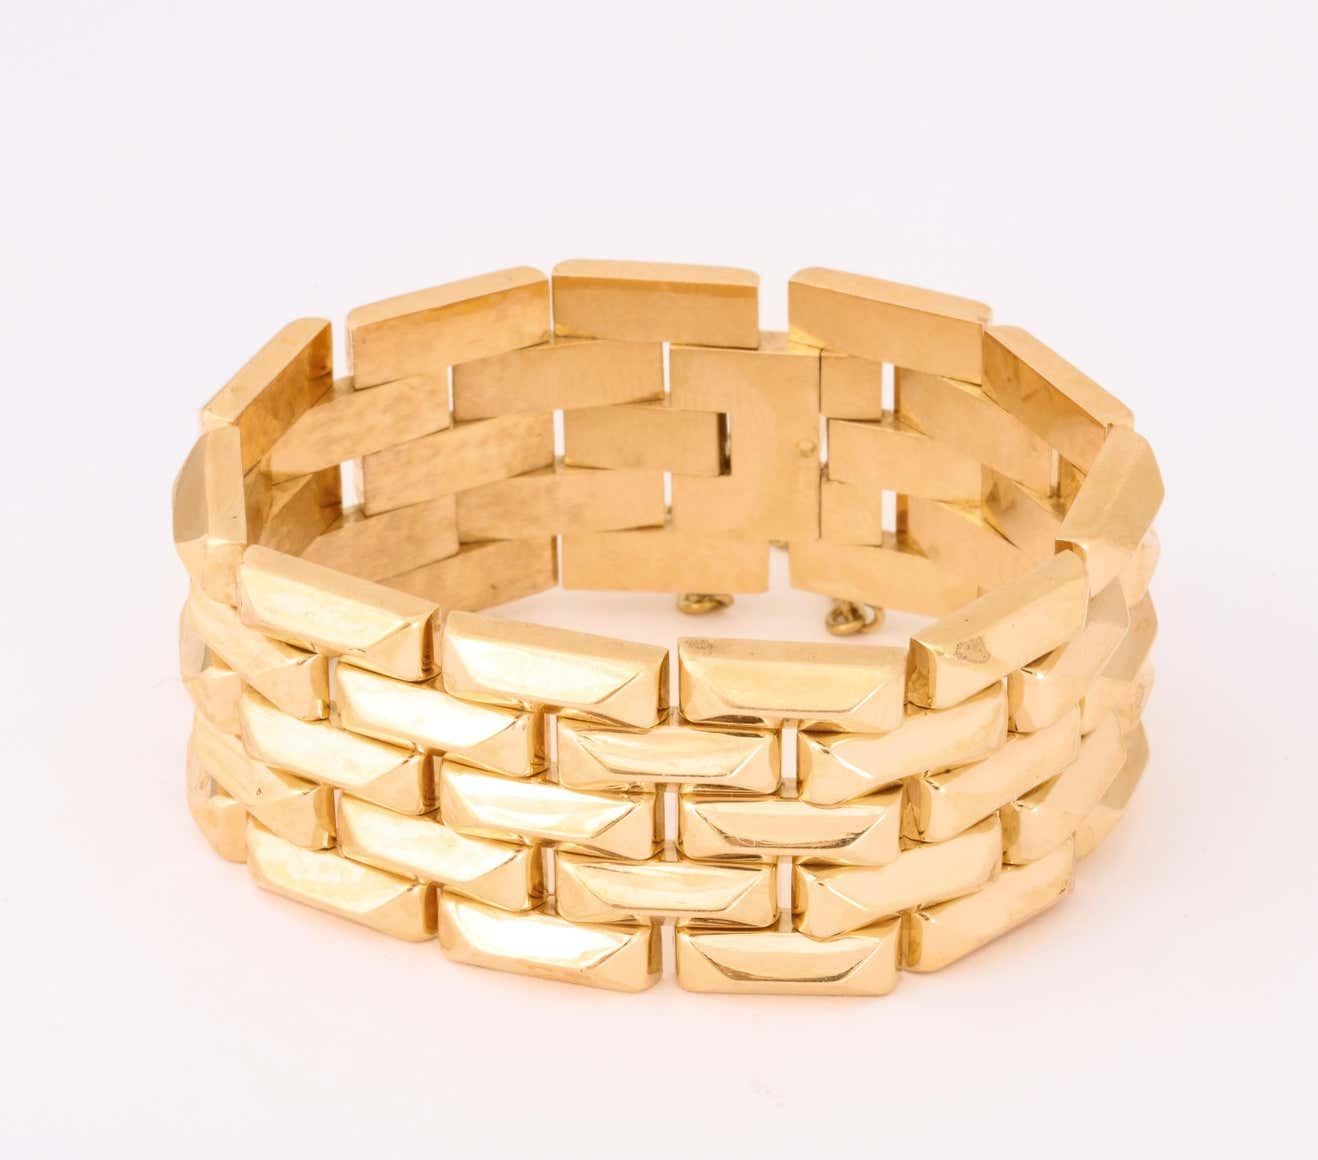 One 18kt Buttery Yellow Gold High Polish Link Bracelet Consisting Of Five Rows Of Numerous Pyramid Block Design Flexible Pieces. This Bracelet Is Created In The 1940's-1950's Era.
